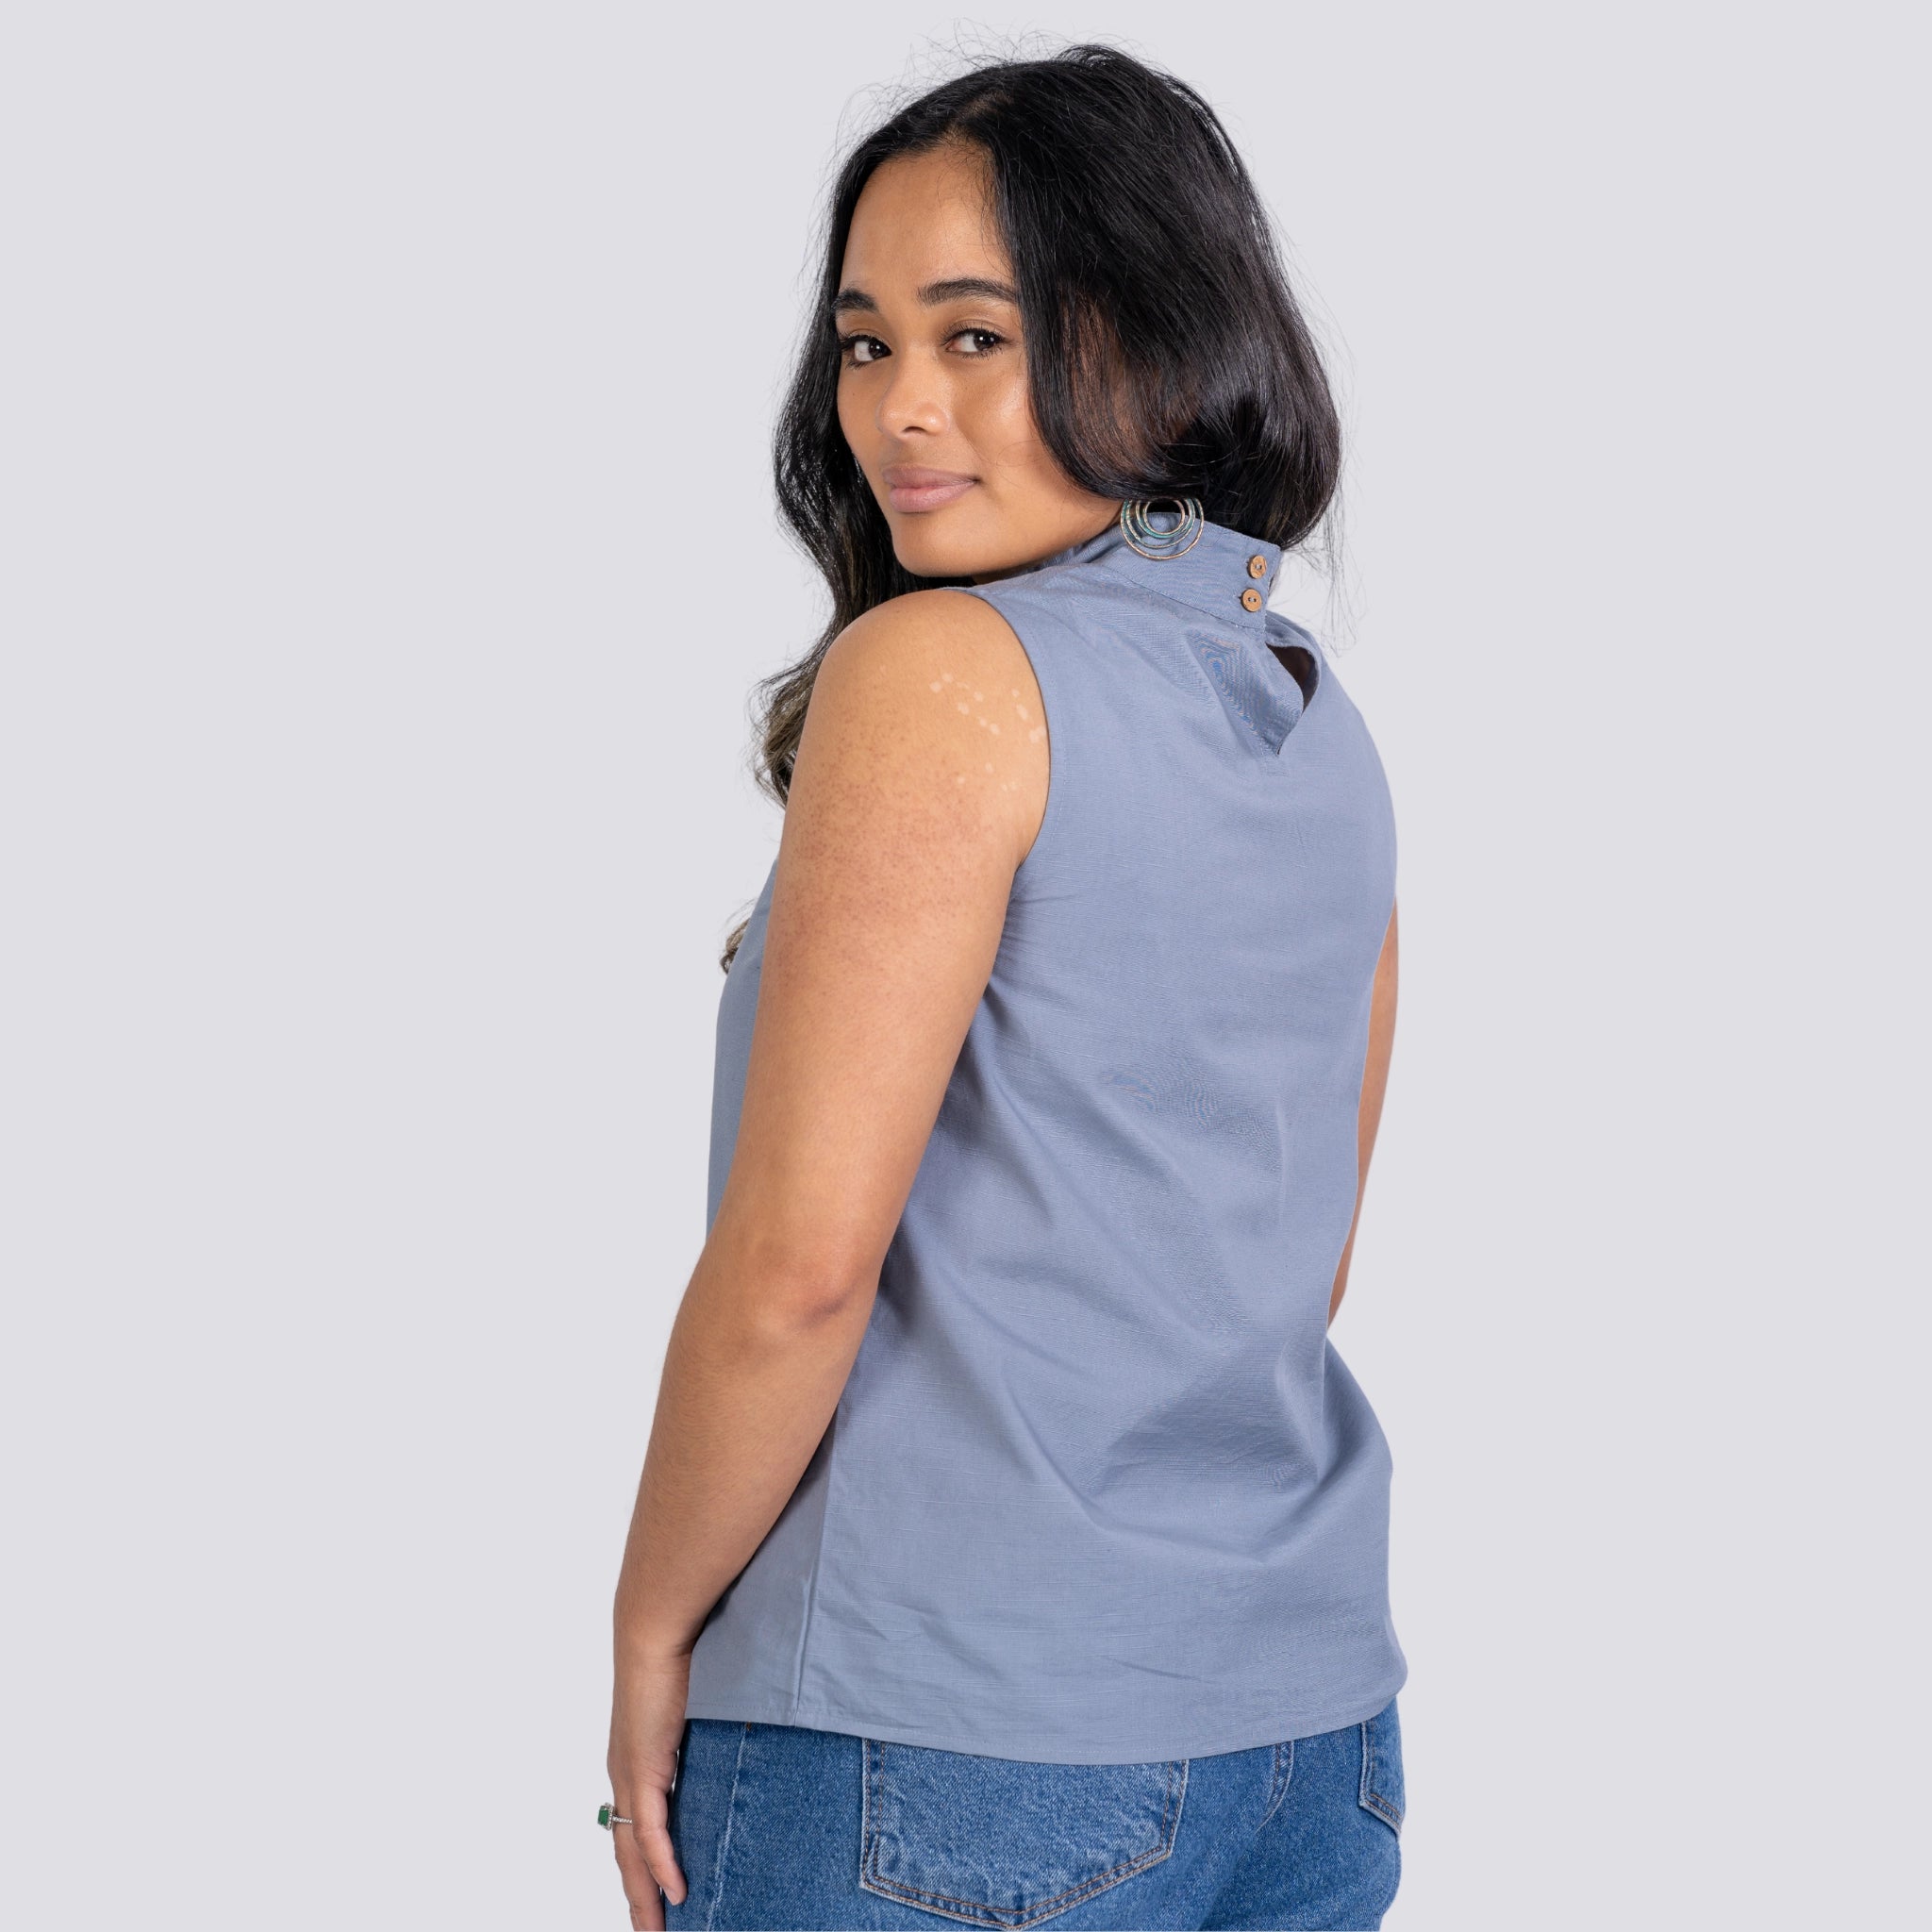 A woman in a Karee Linen Sleeveless Top in Classic Grey and jeans, looking over her shoulder with a subtle smile, against a plain light background.